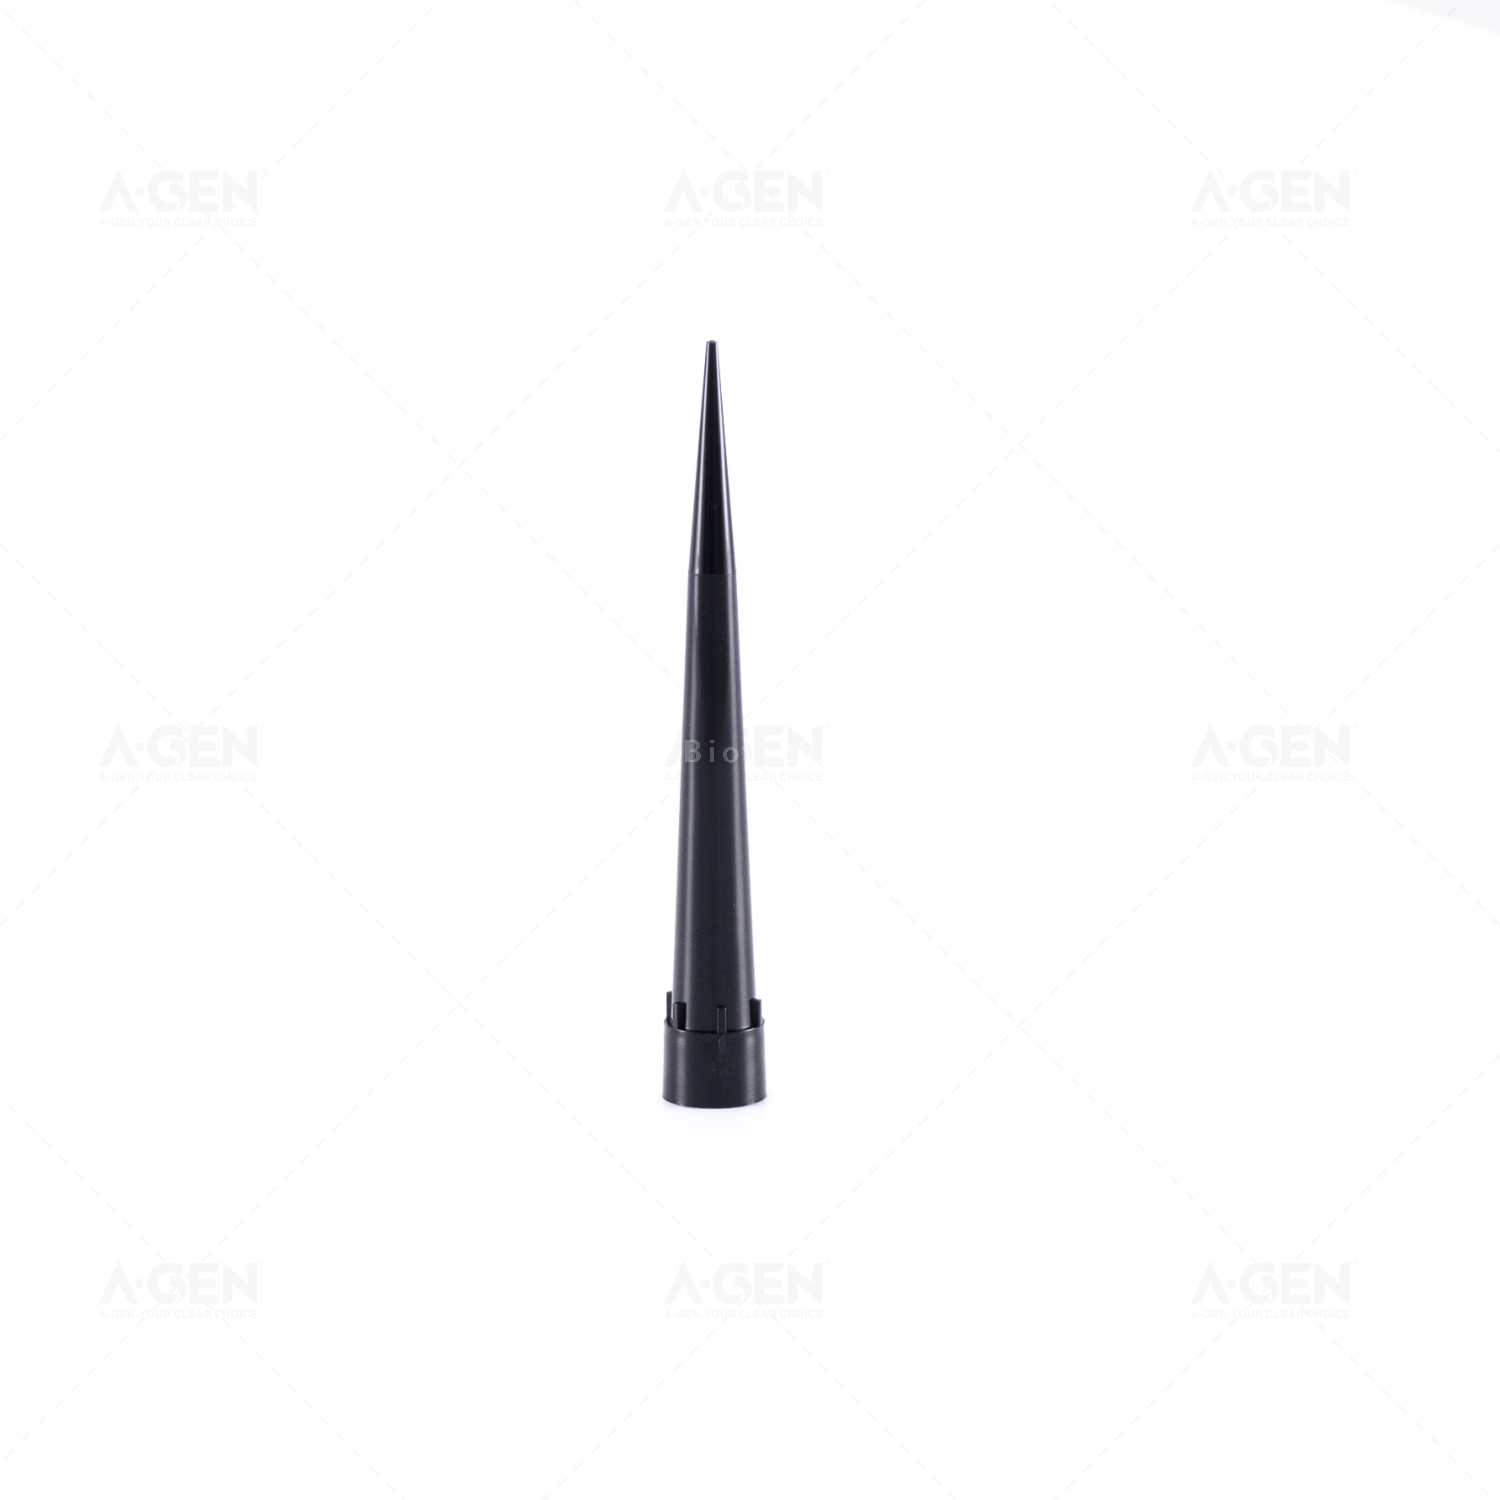 5 Combined Boxes Sterile Hamilton Pipette Tip Conductive 300μL Black PP Pipette Tip for Liquid Transfer Without Filter